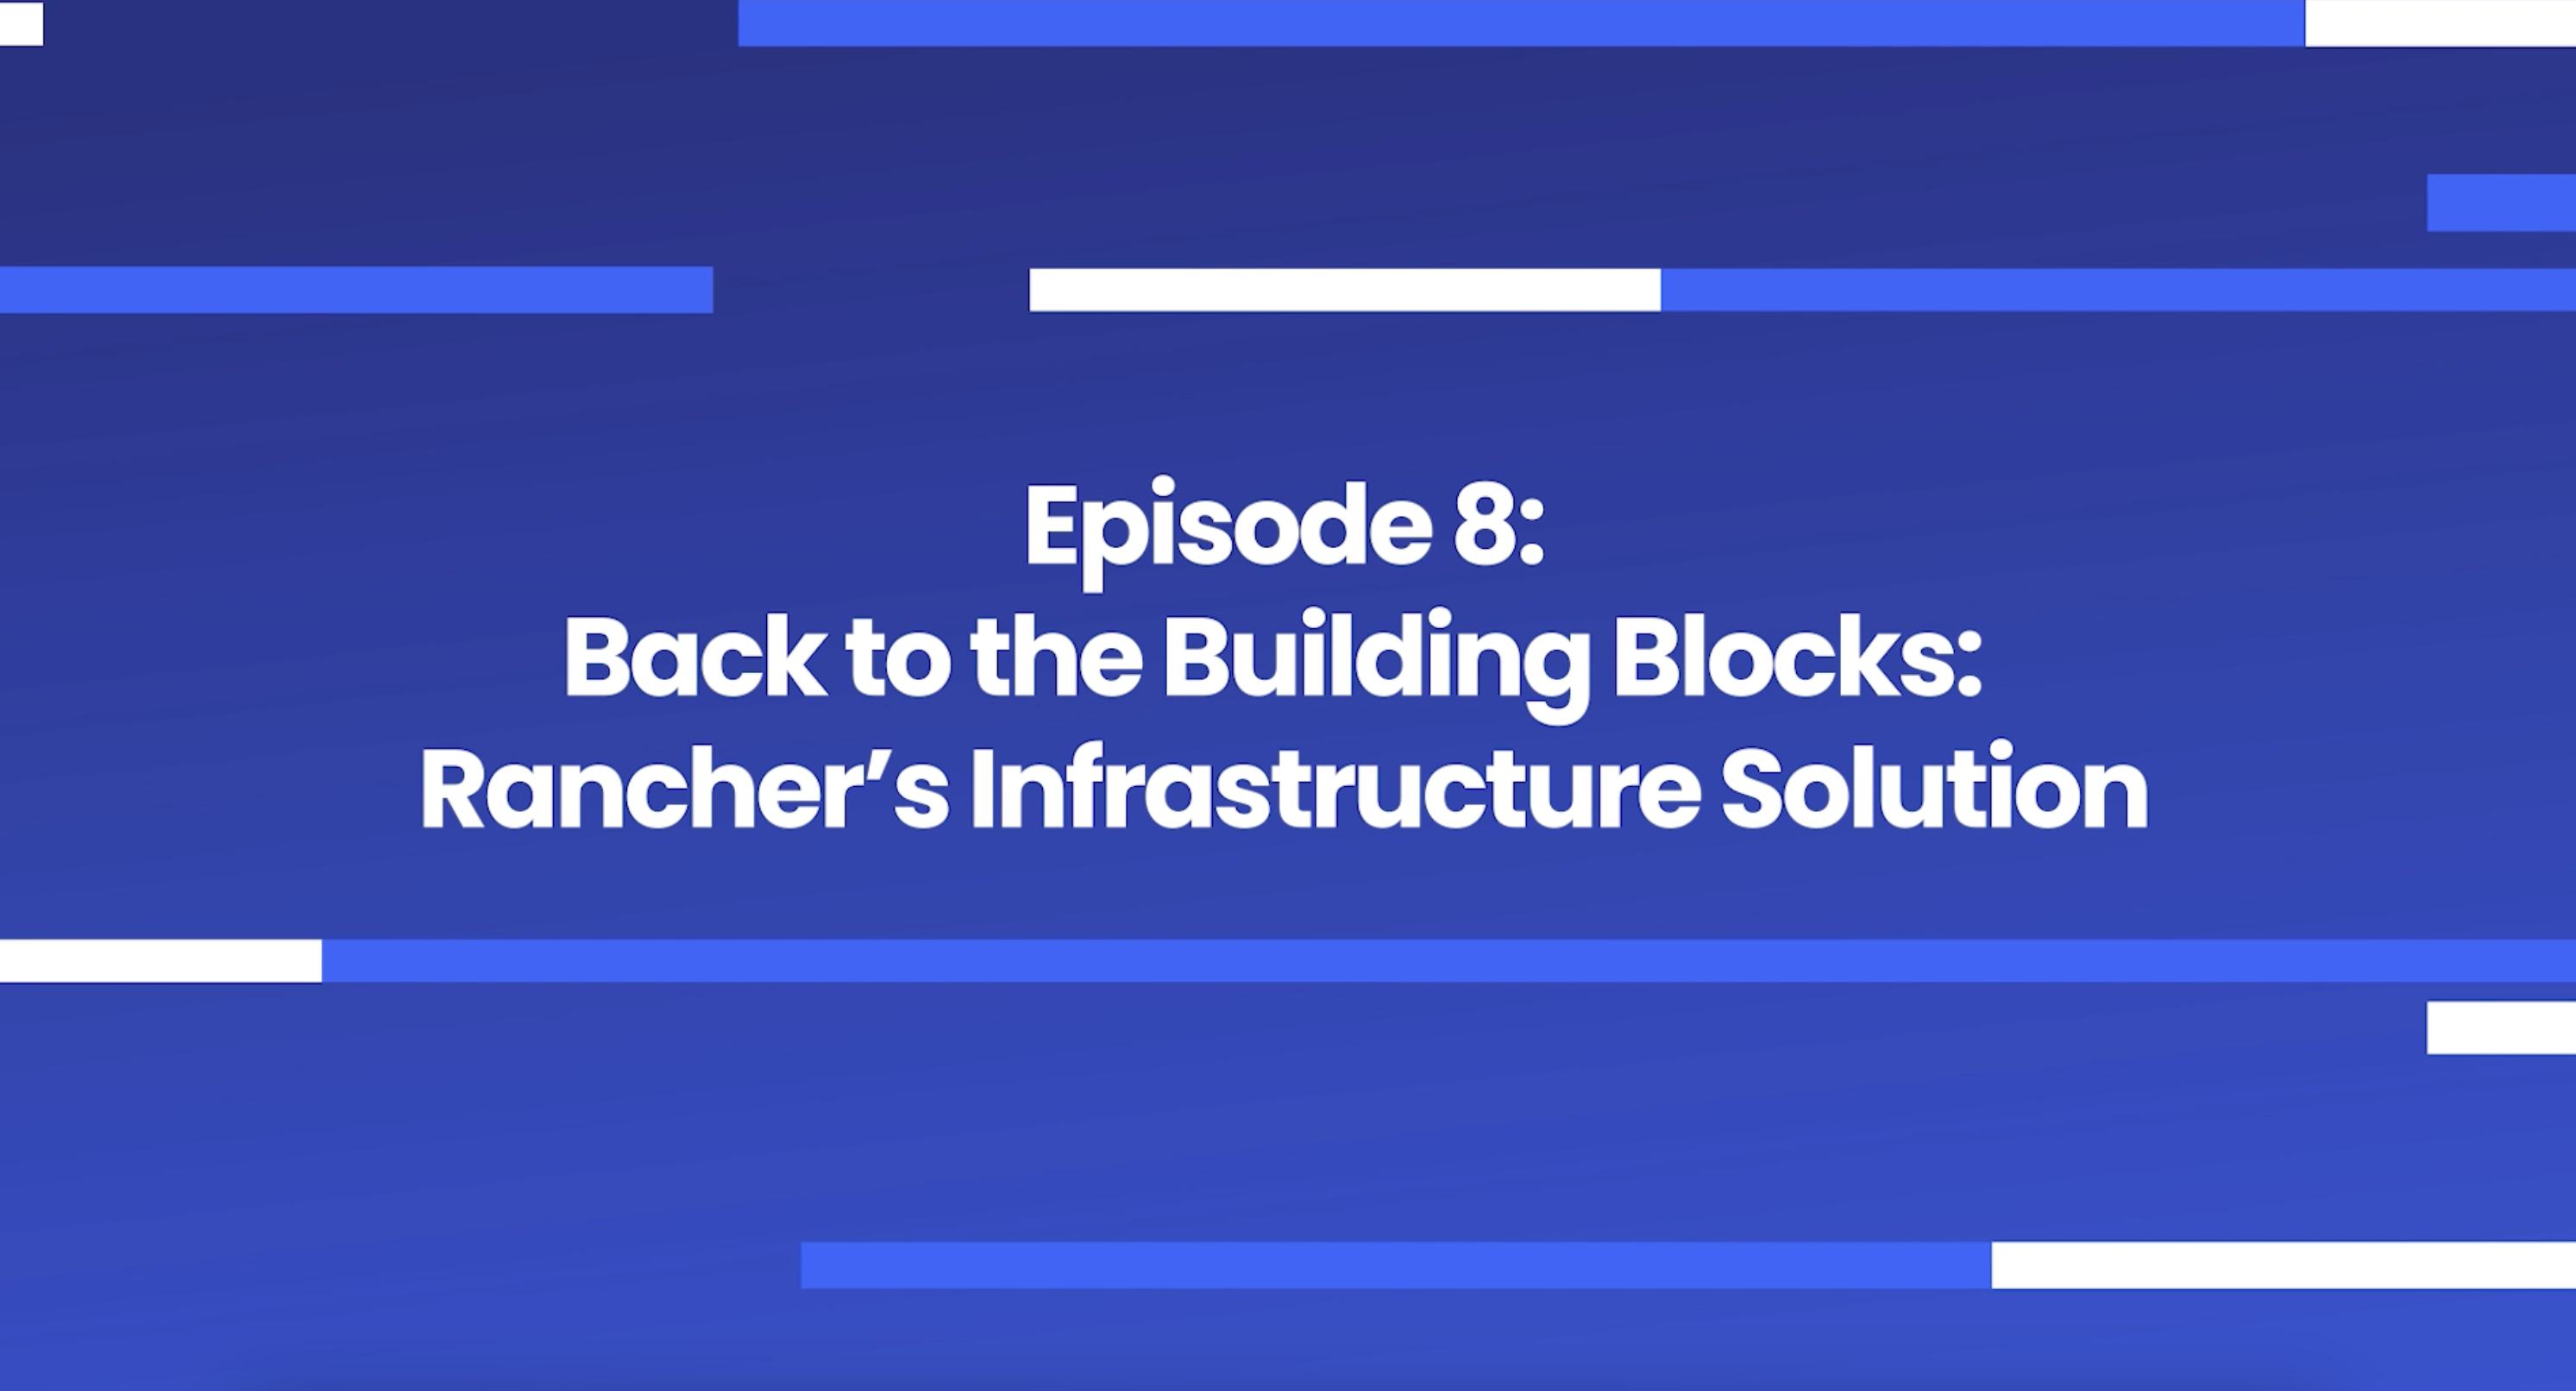 Episode 8: Back to the Building Blocks: Rancher's Infrastructure Solution (Part 2)